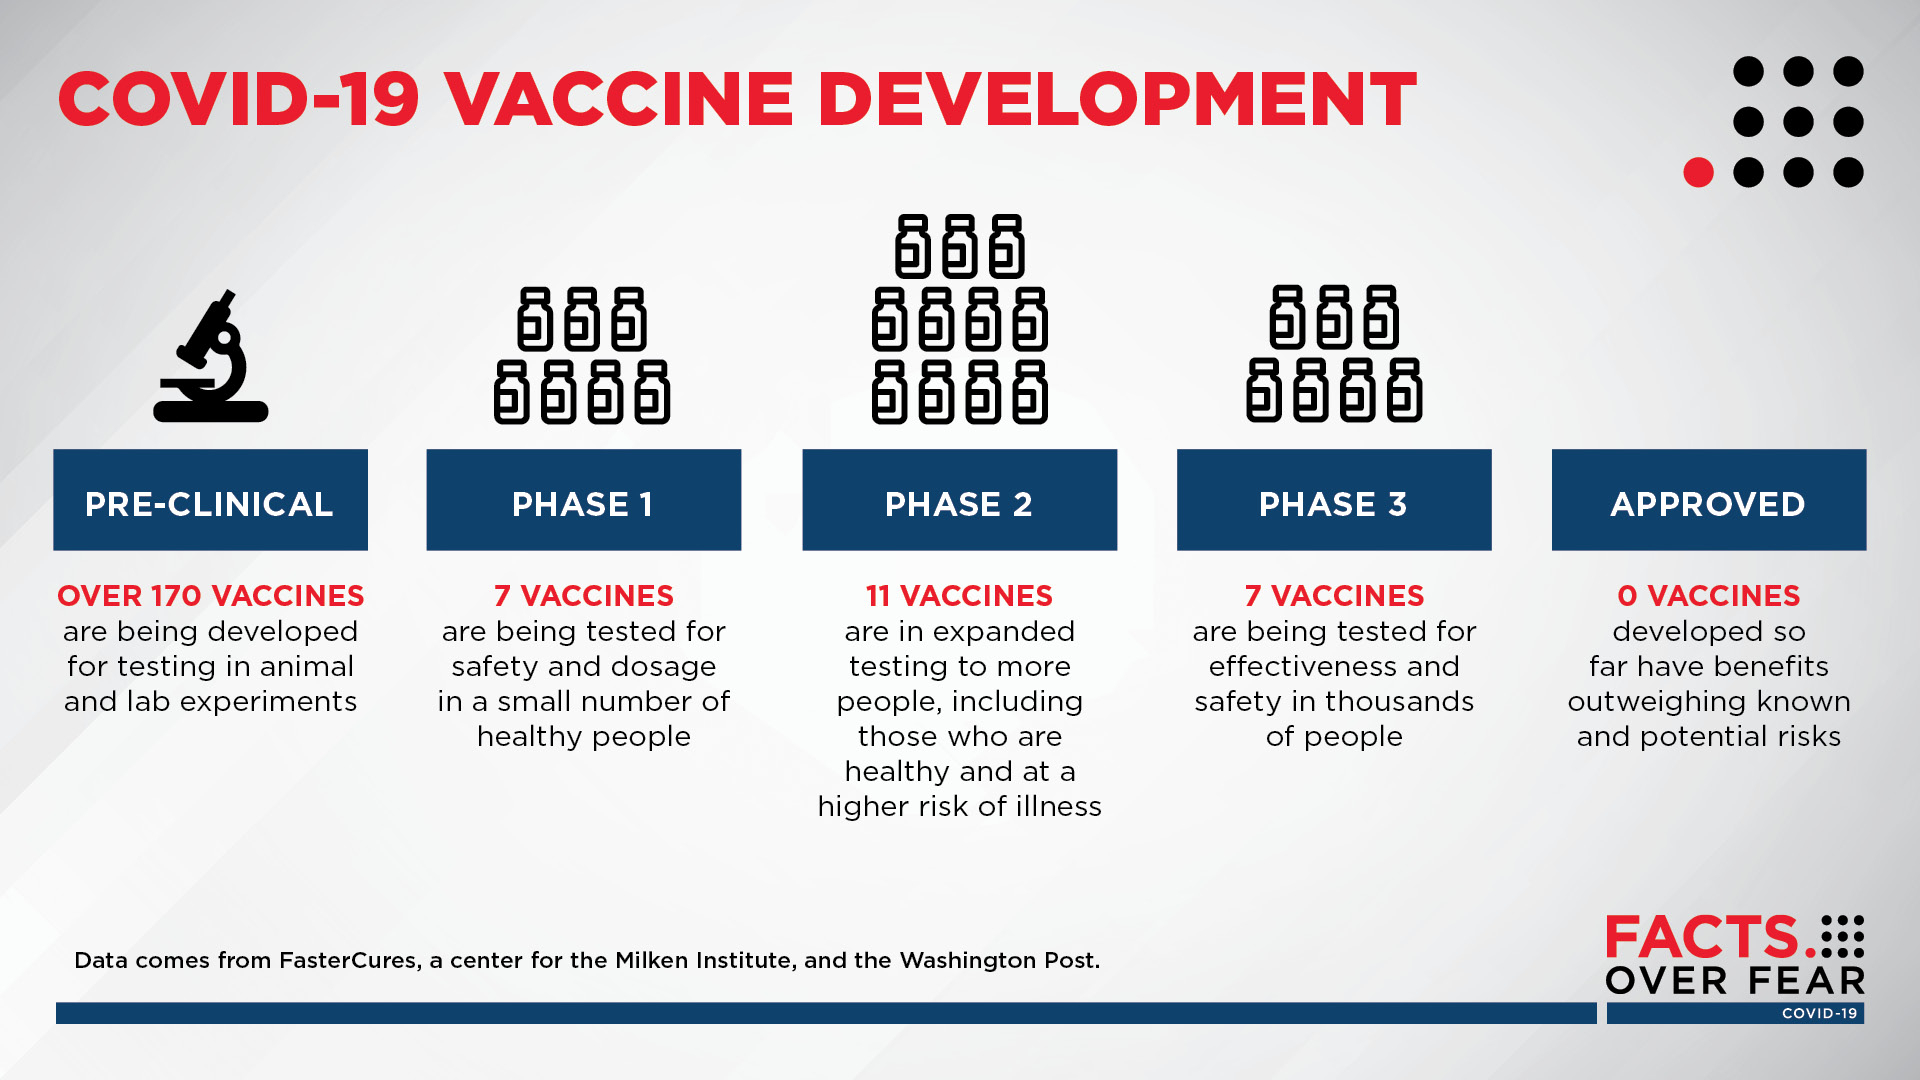 COVID-19 vaccine development: over 170 vaccines are in pre-clinical phase, 7 vaccines are in phase 1, 11 vaccines are in phase 2, 7 vaccines are in phase 3 and 0 vaccines are FDA-approved as of Aug. 26, 2020.